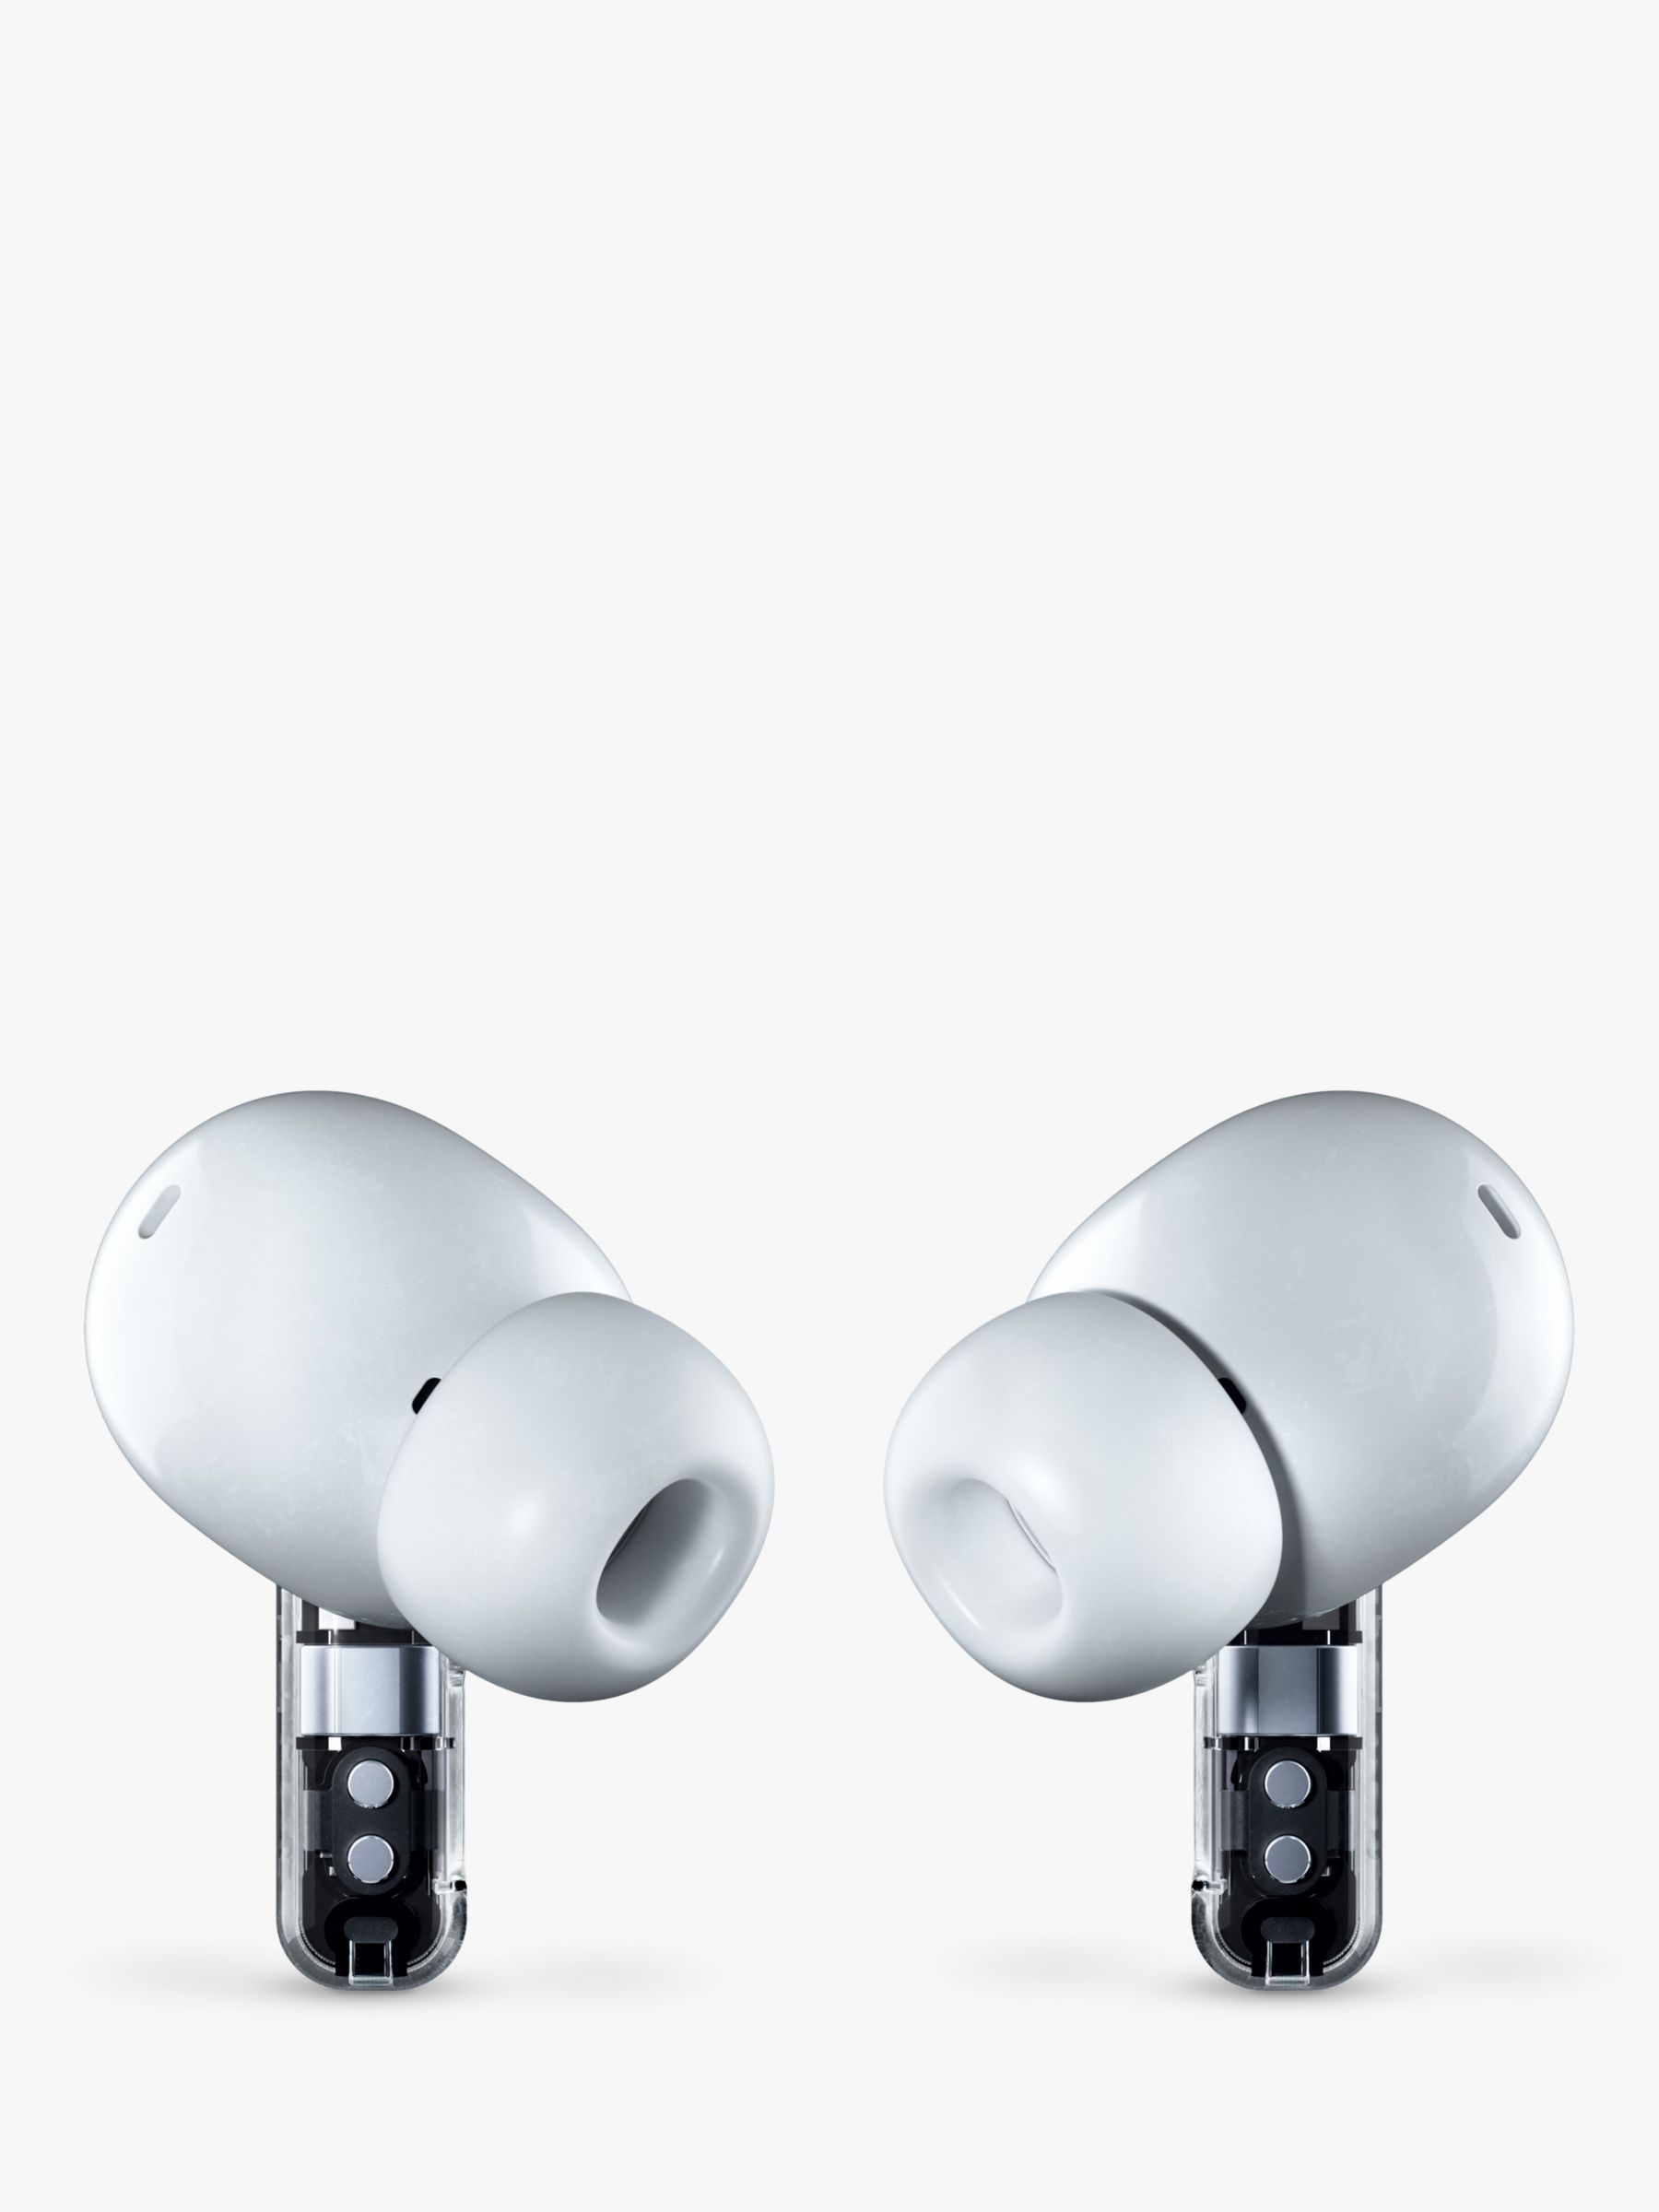 Nothing Ear (2) Active Noise Cancelling True Wireless Bluetooth In-Ear  Headphones with Mic/Remote, White